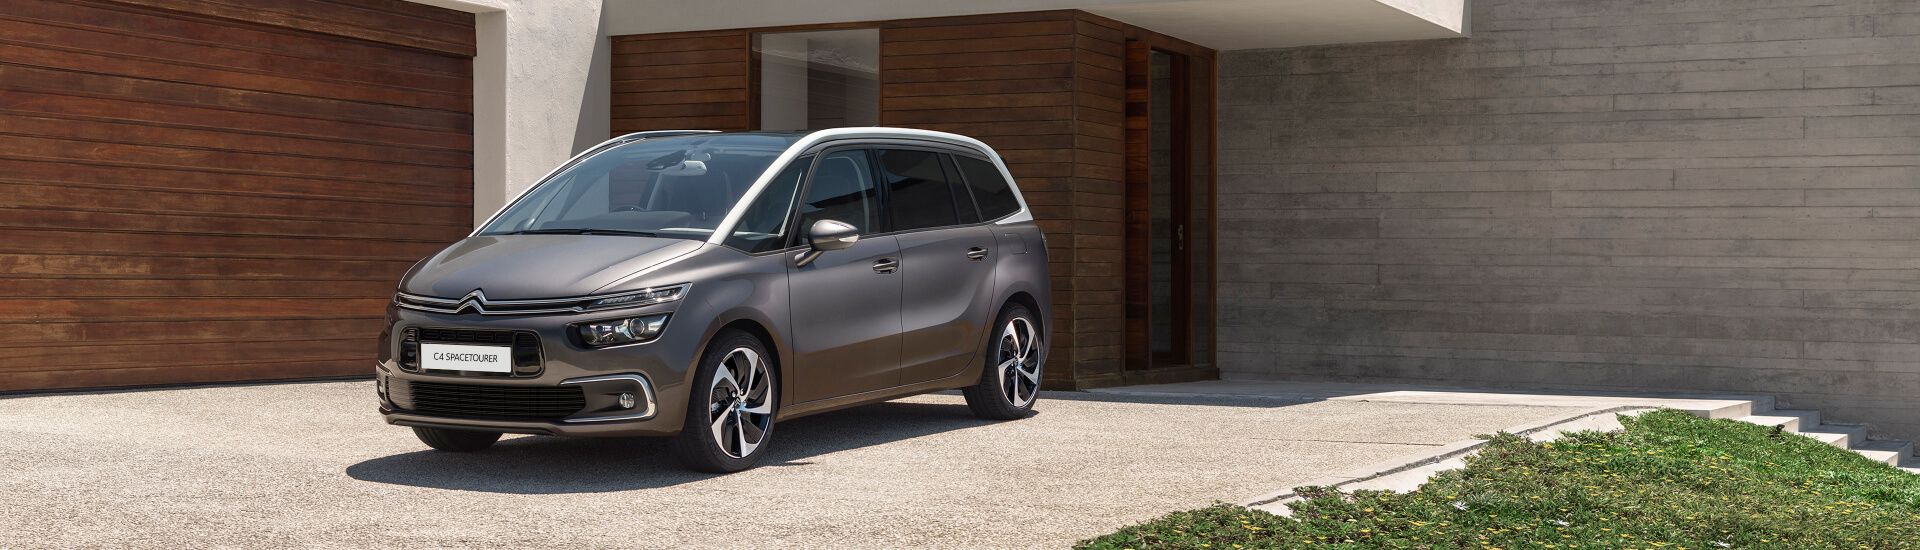 Latest Citroen used-vehicles Offers